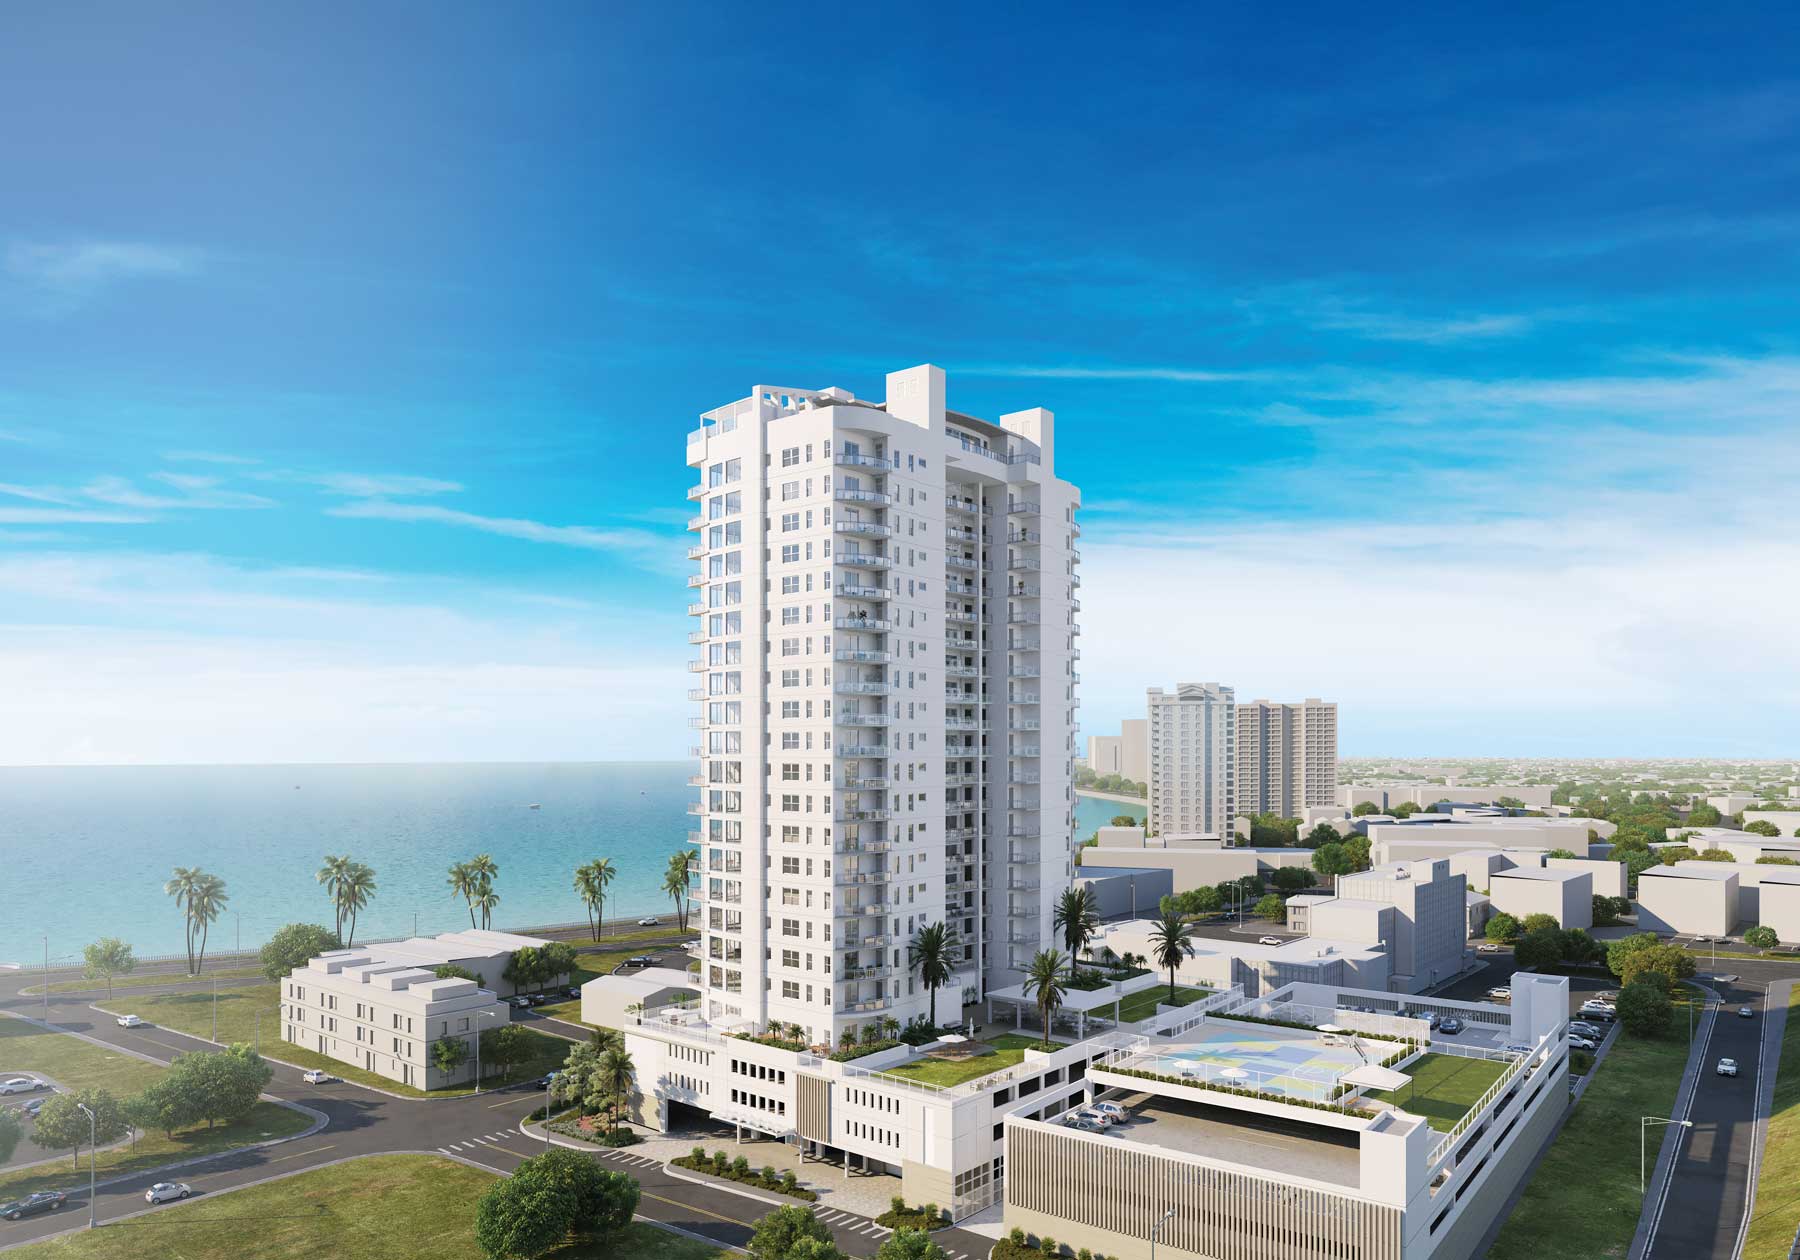 Ronto Group's 73-unit Altura Bayshore is slated for delivery in 2023.